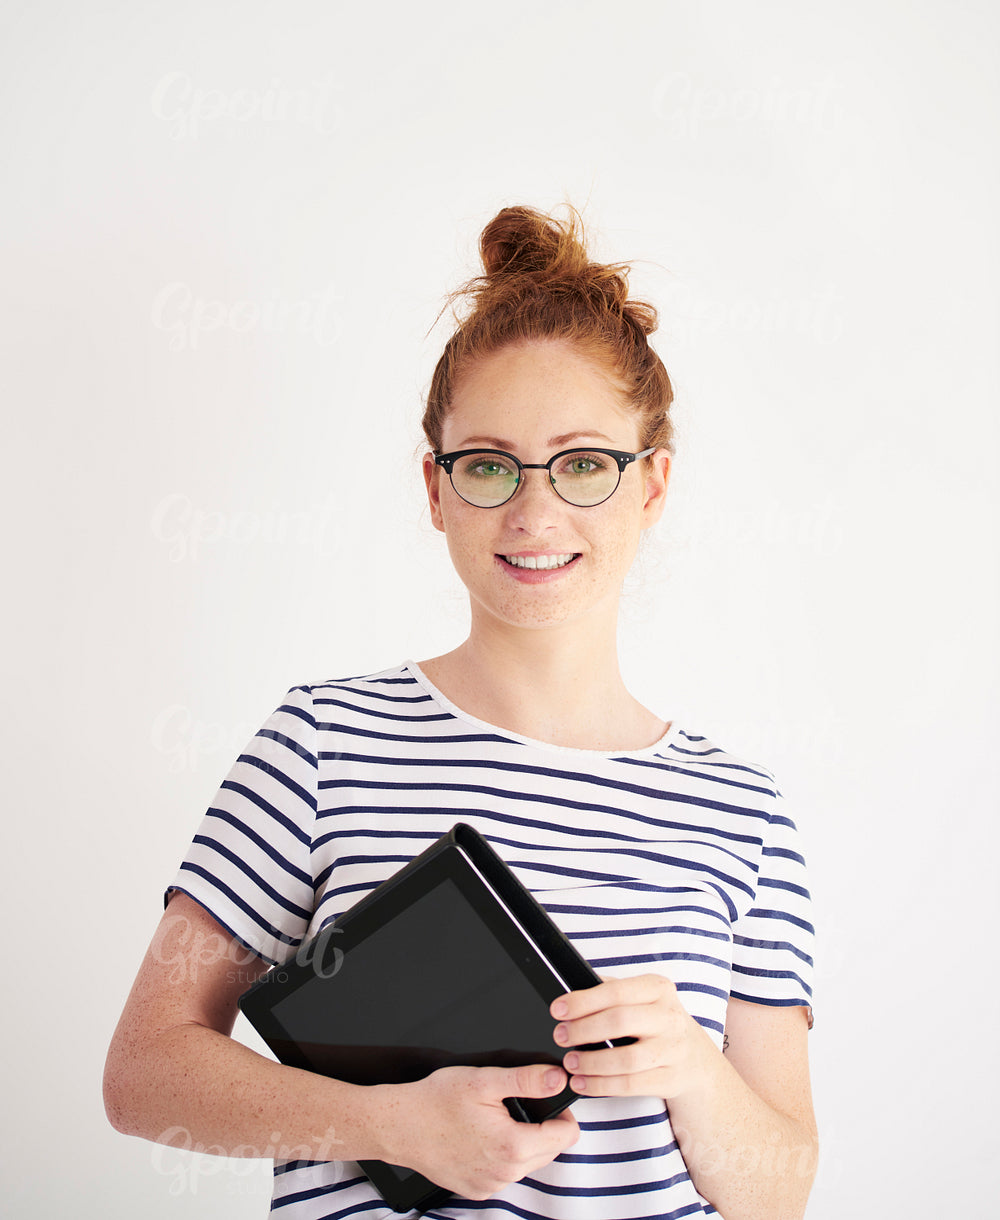 Portrait of young woman holding a tablet at studio shot